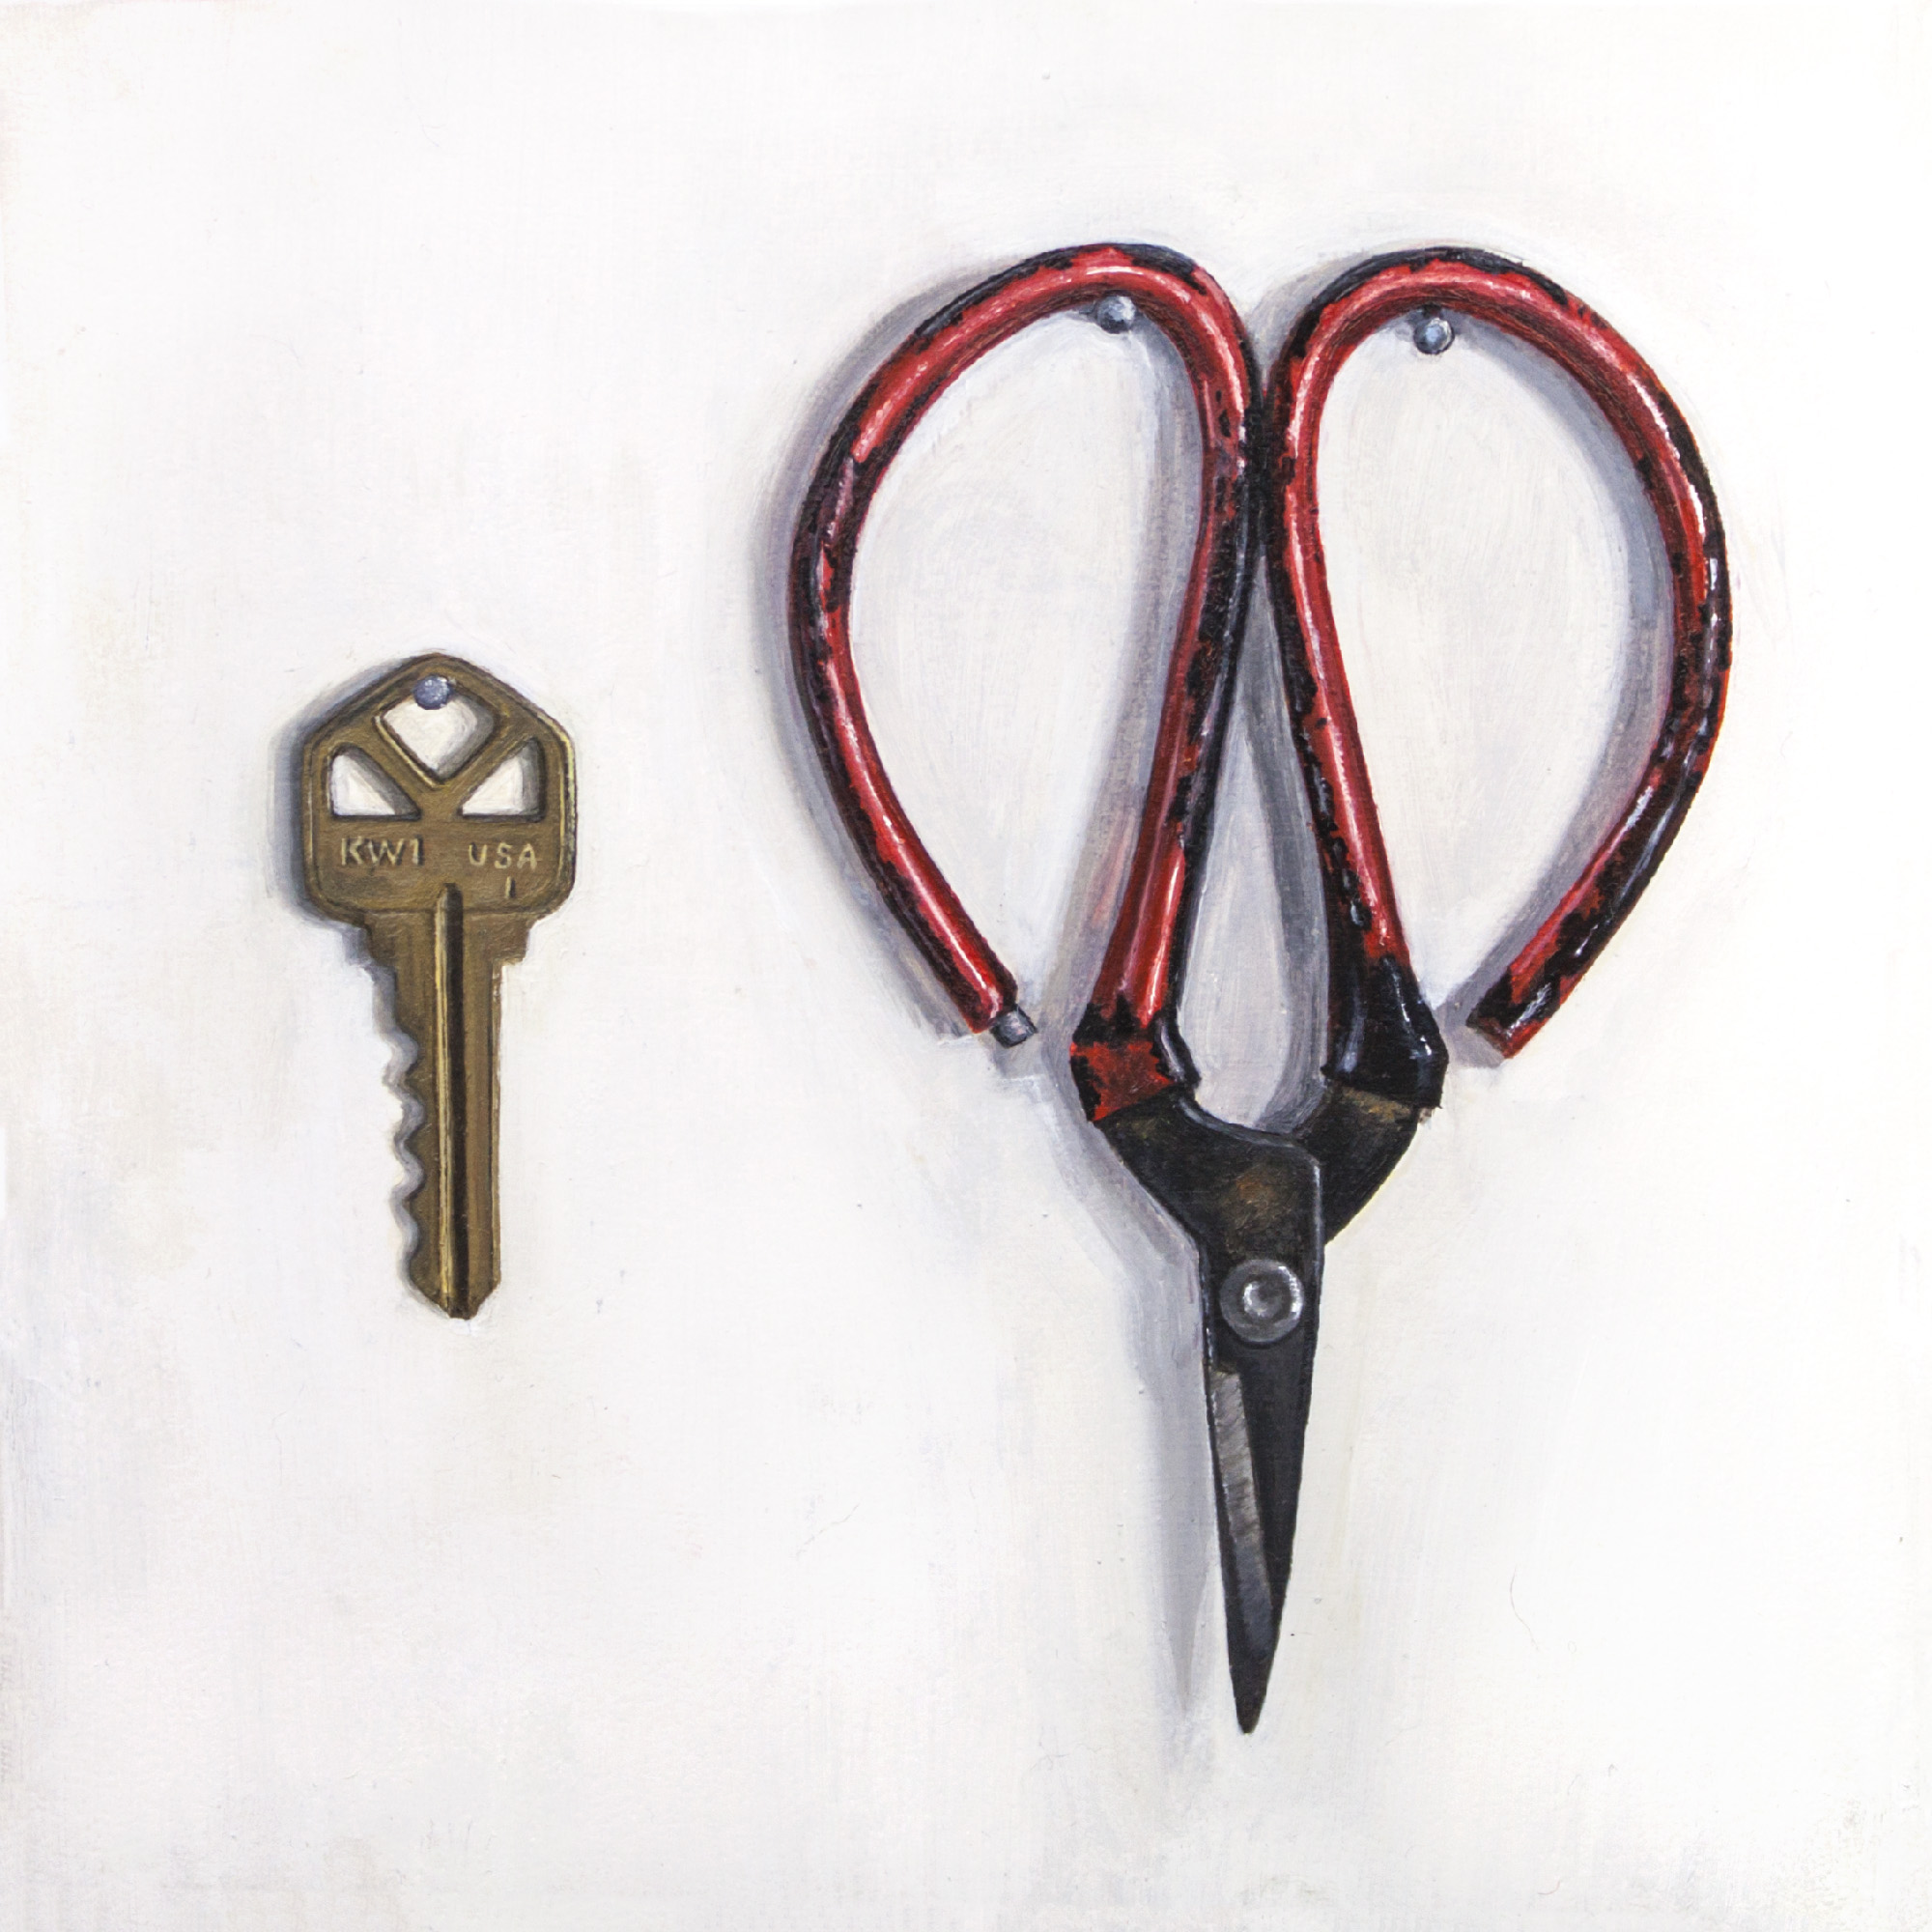 Teeth and Nails: Key and Scissors